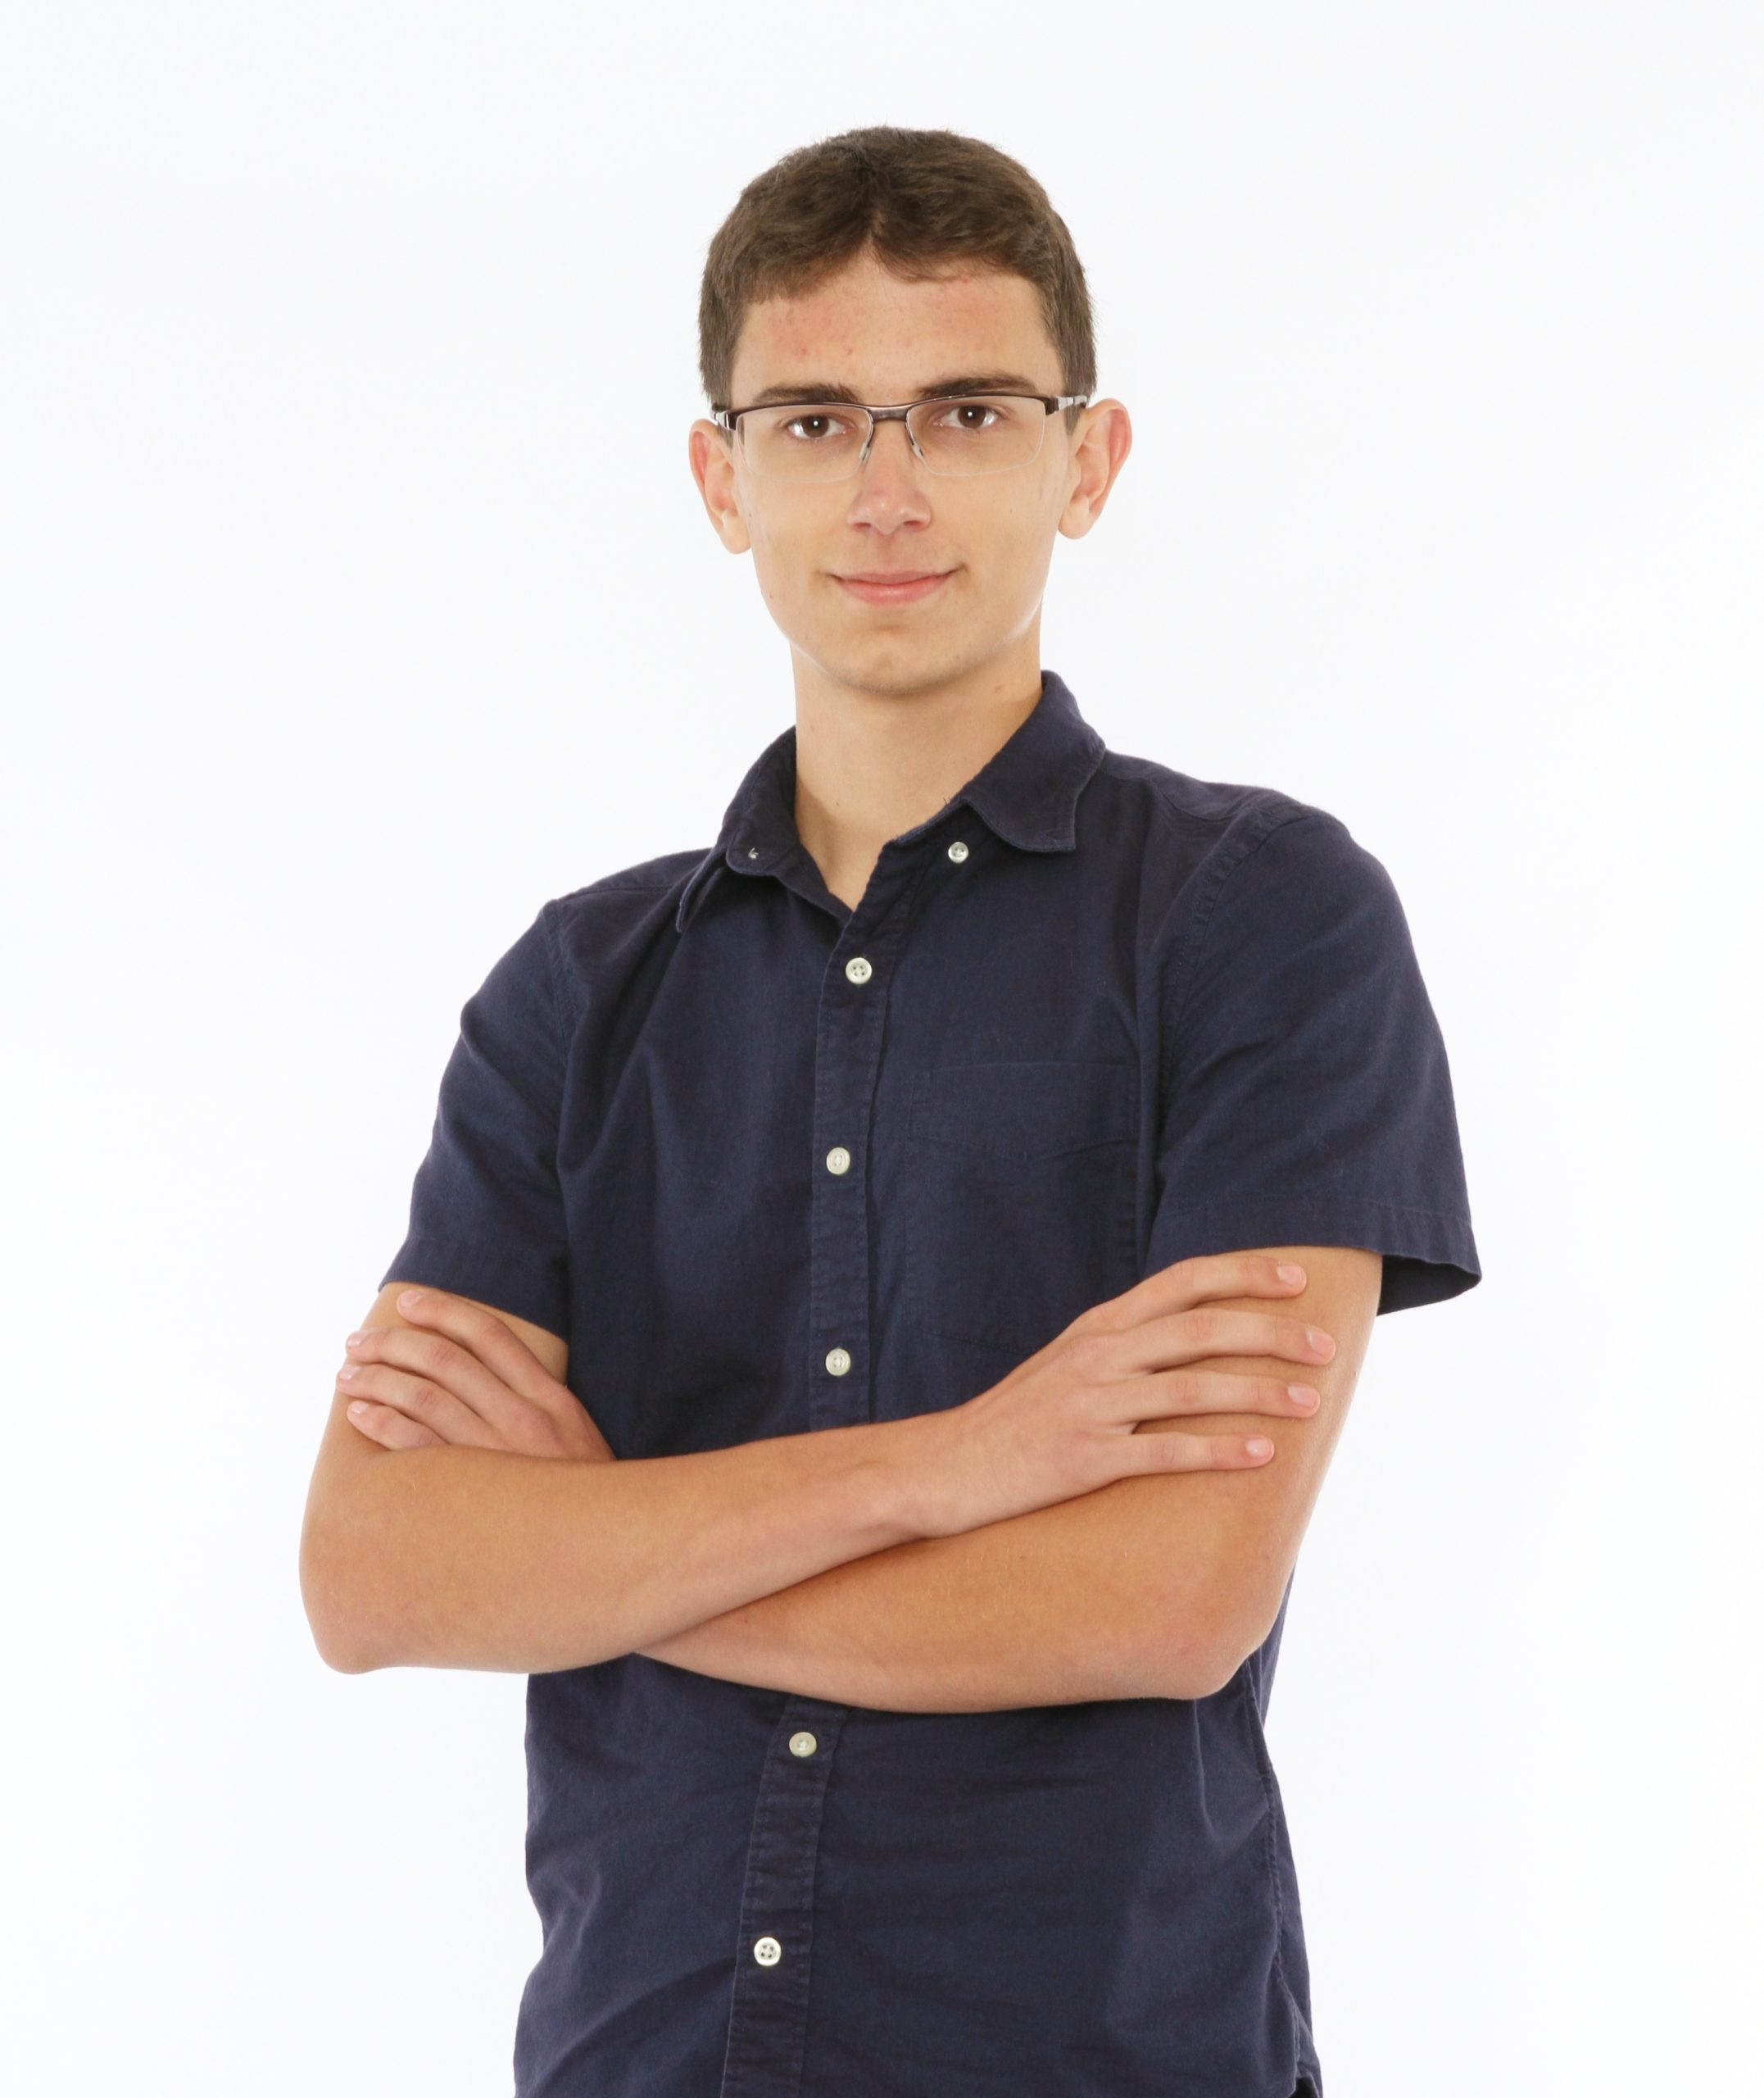 Colten standing with his arms crossed. He is wearing a blue collared shirt and glasses.